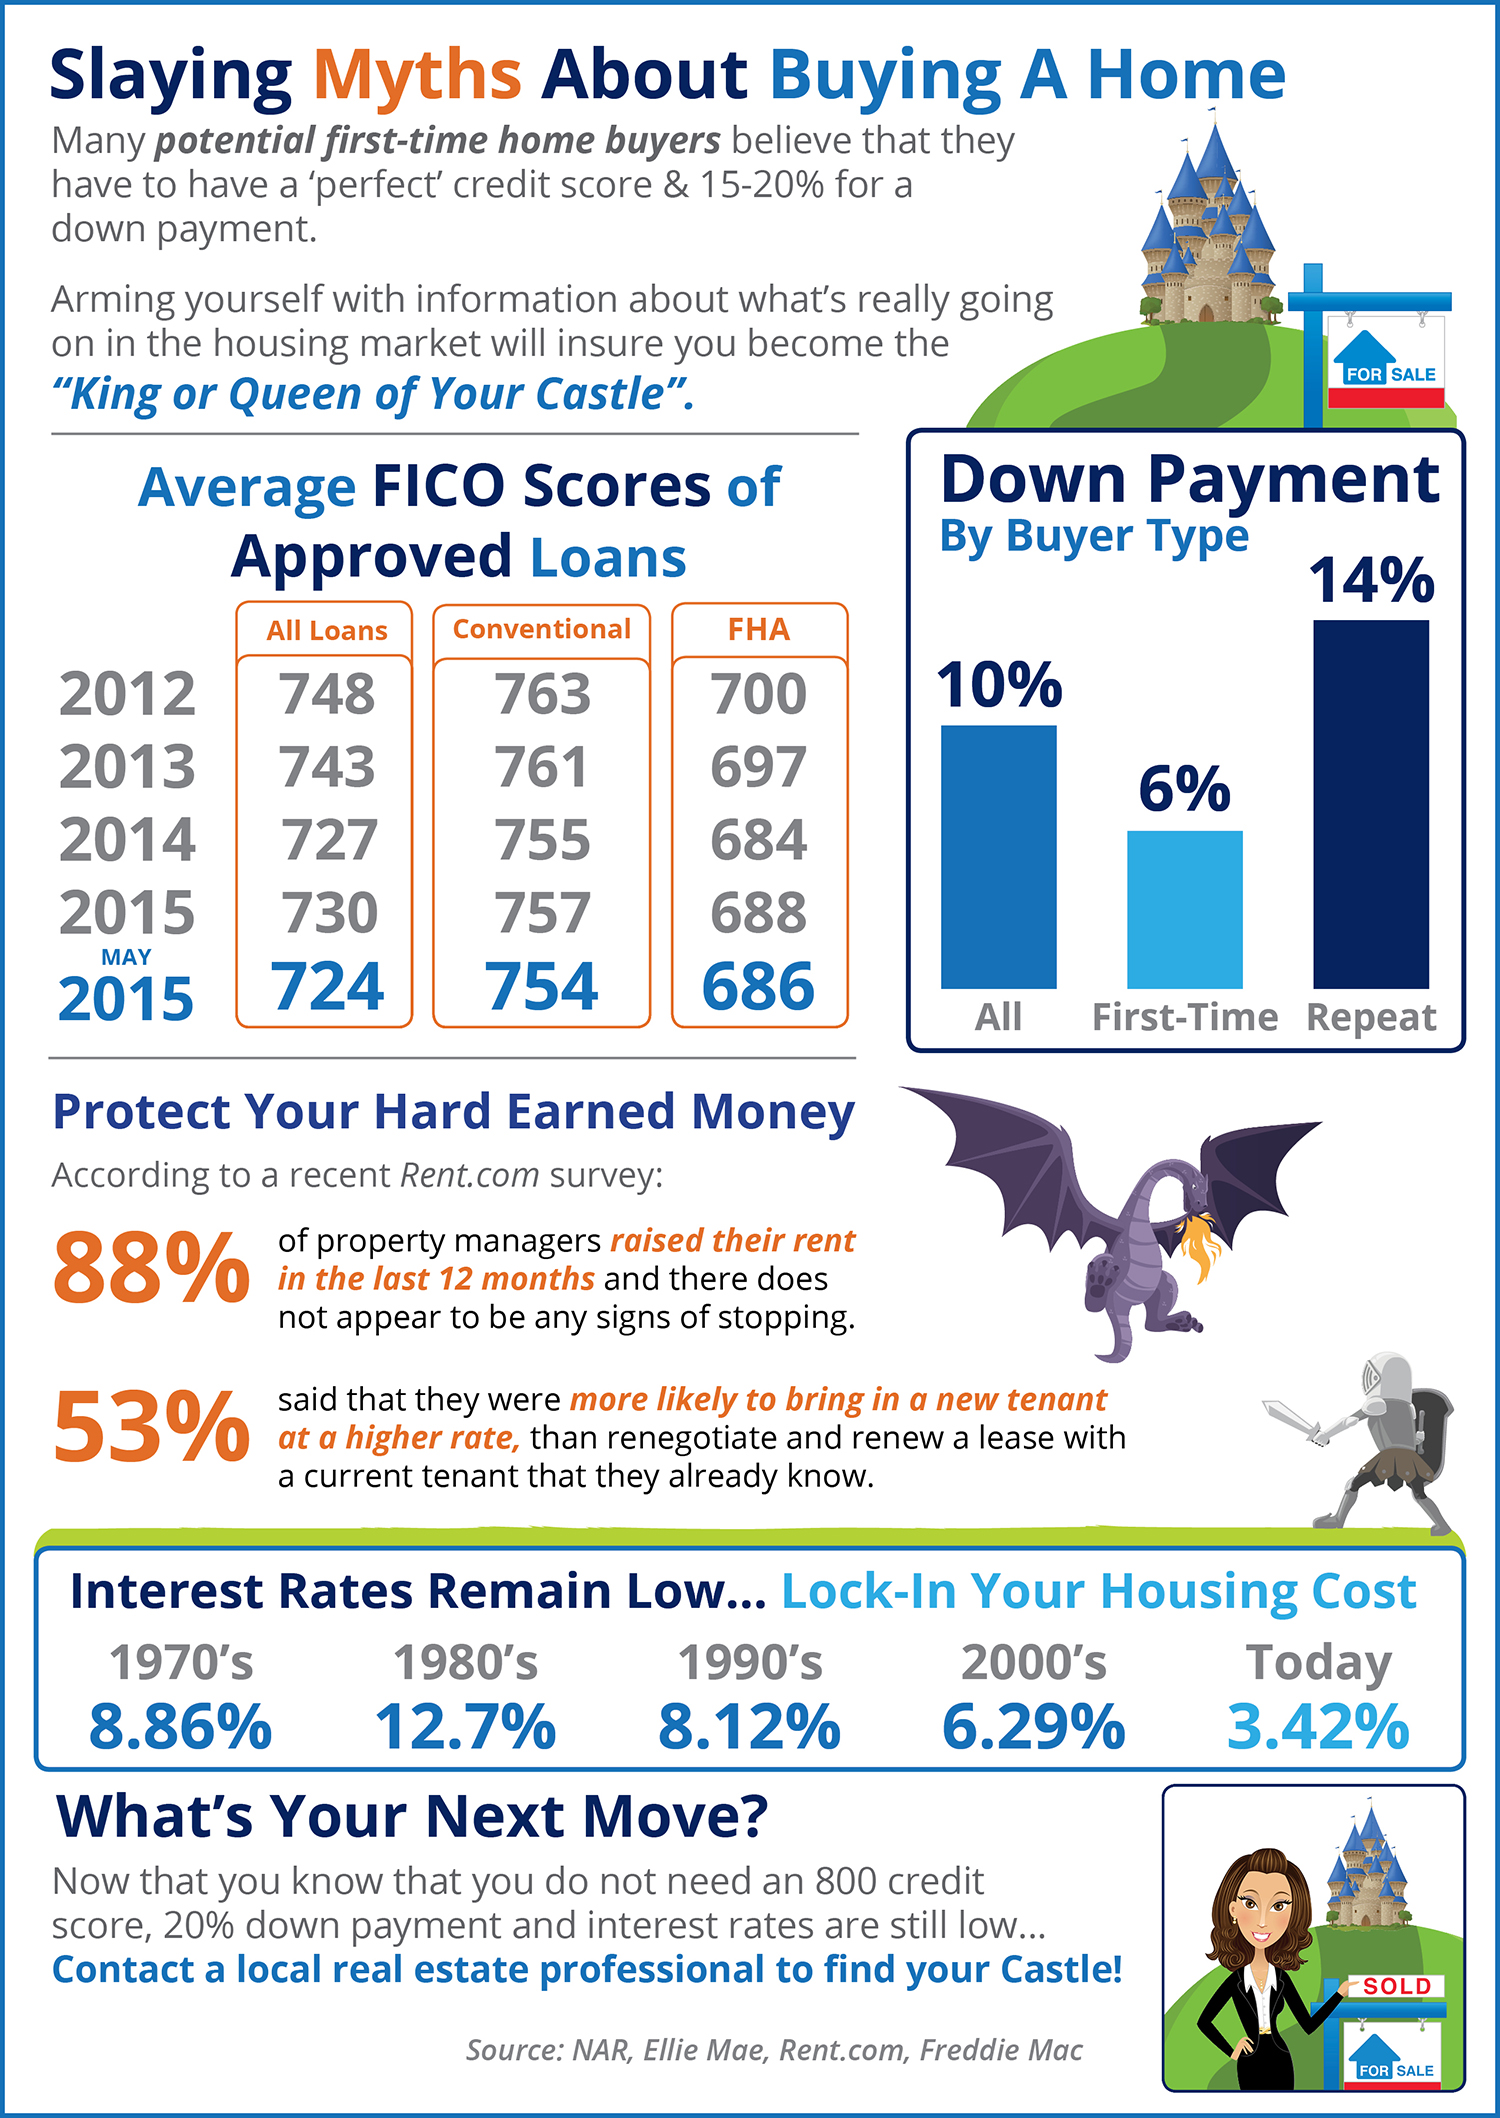 Slaying Myths About Home Buying [INFOGRAPHIC]